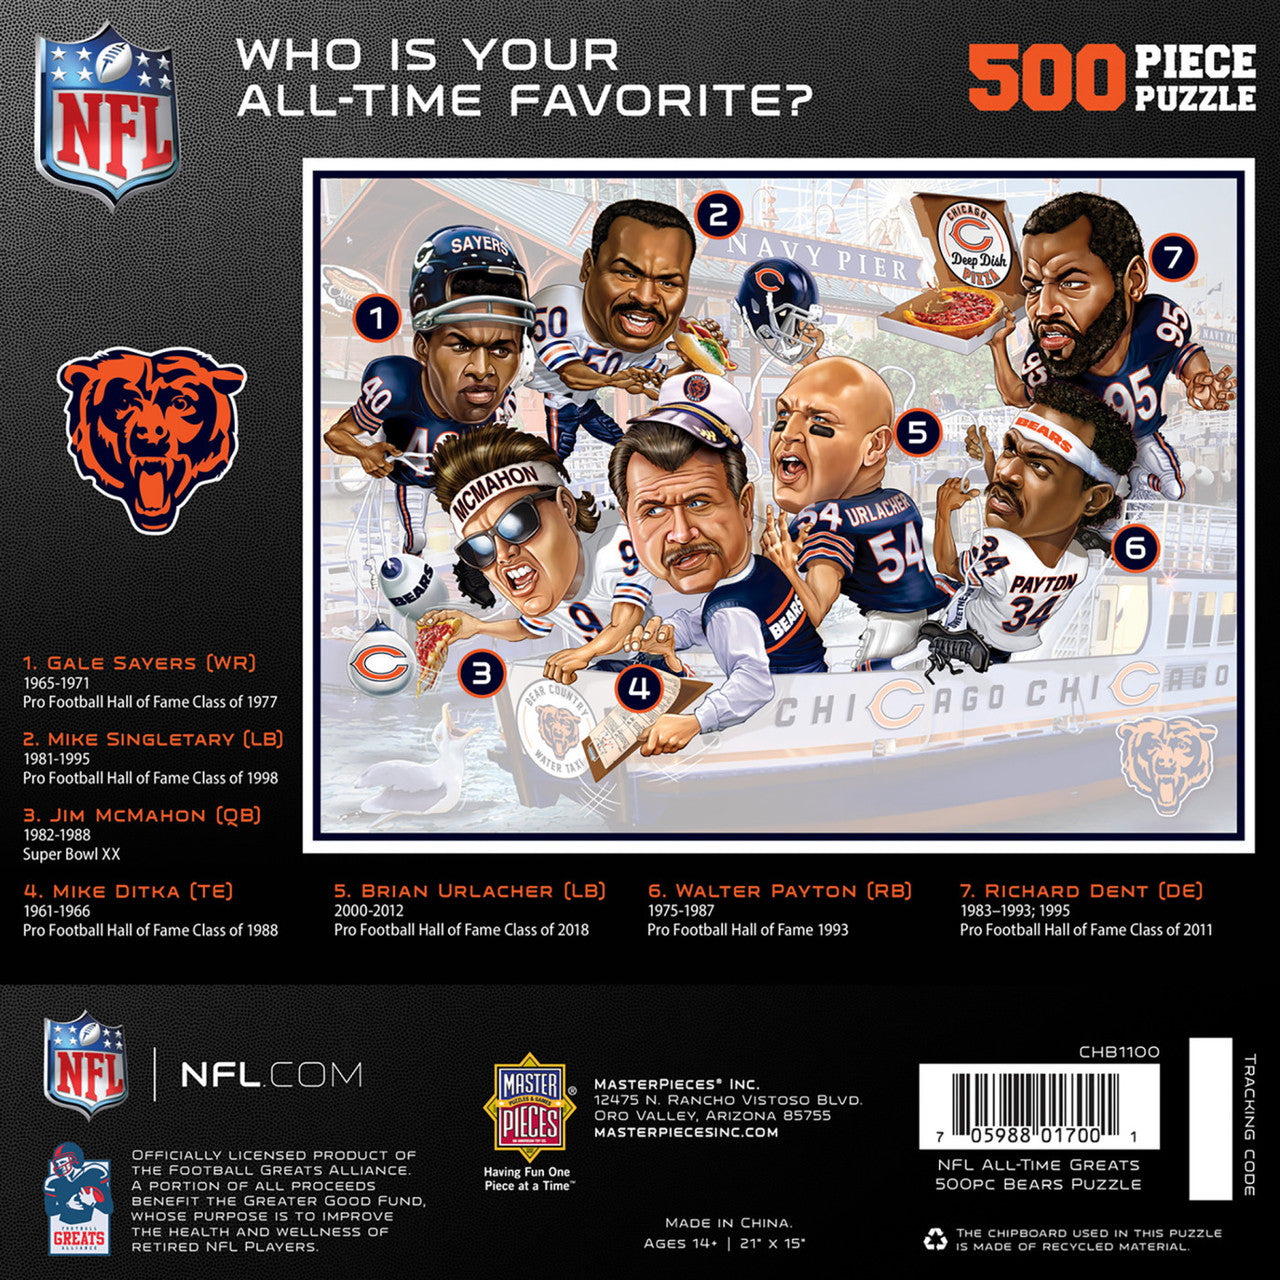 Chicago Bears All-Time Greats 500 Piece Puzzle